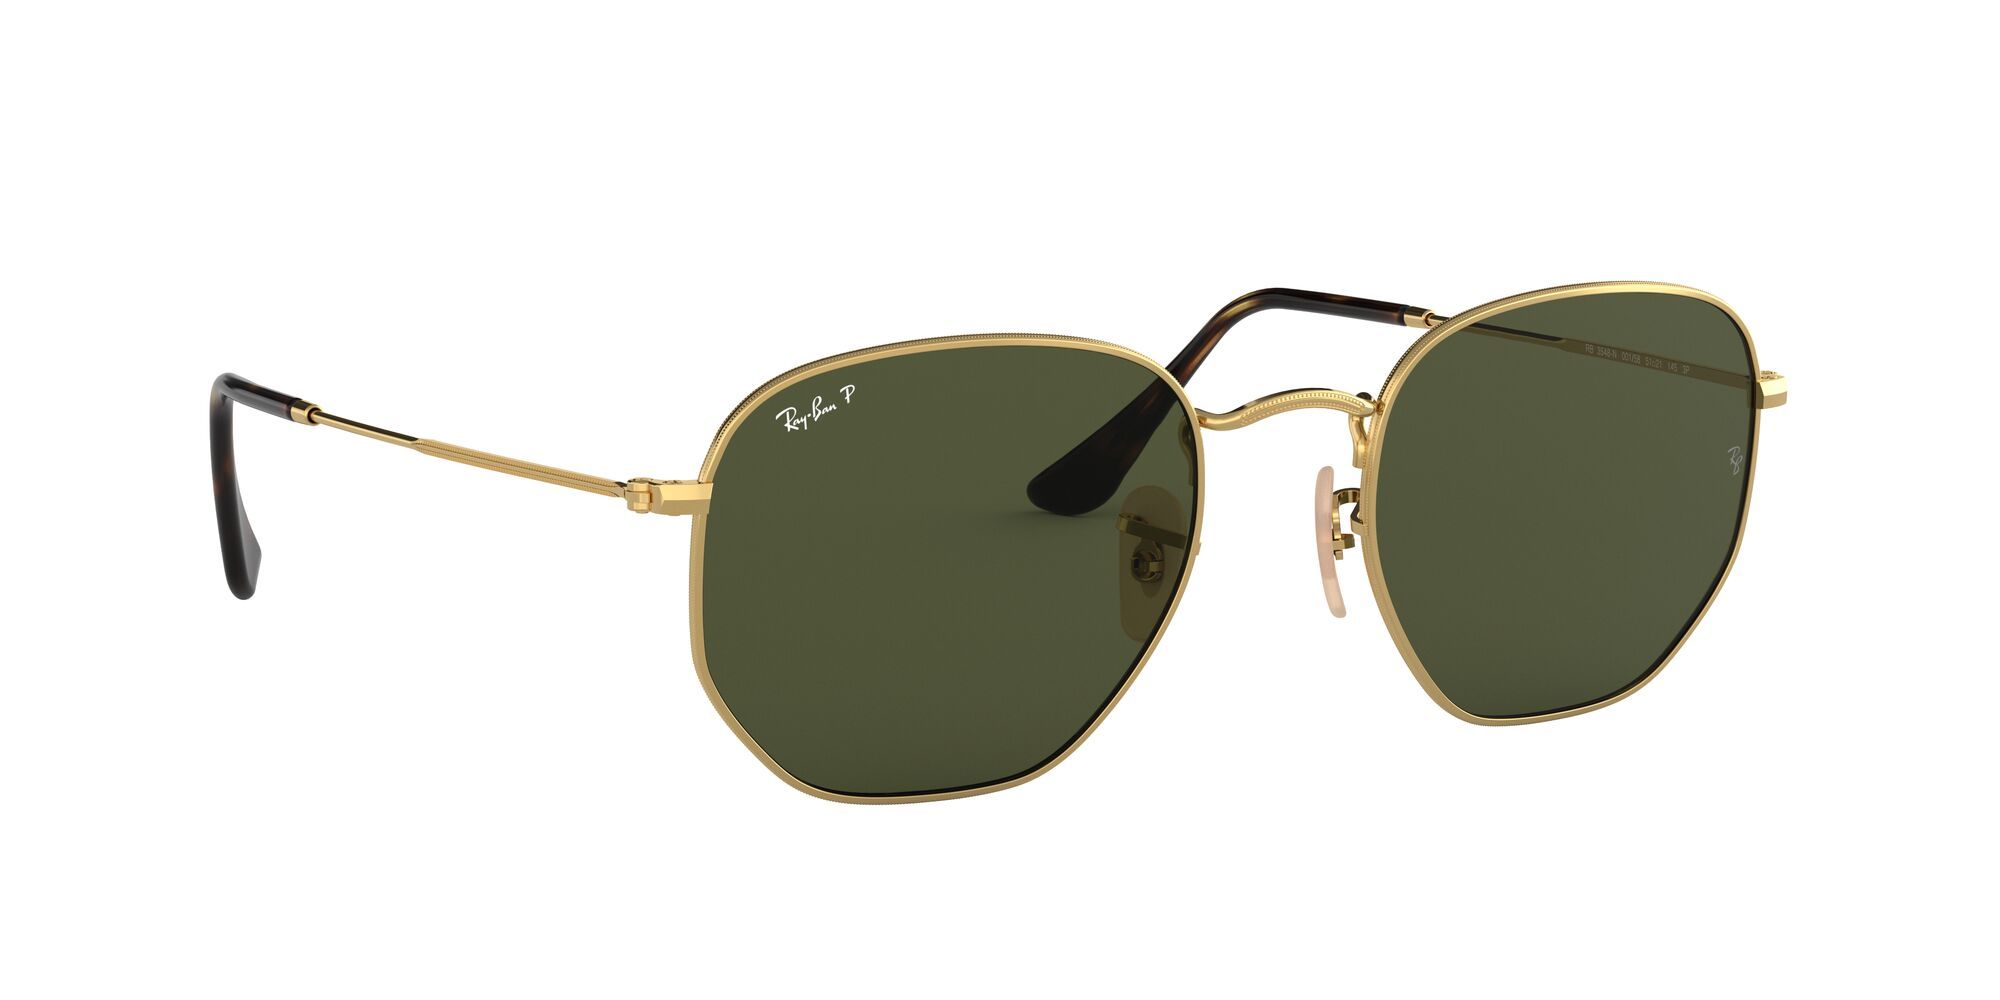 Ray-Ban 0RB3548N Green Polarized Icons Round Sunglasses (55 mm): Buy ...